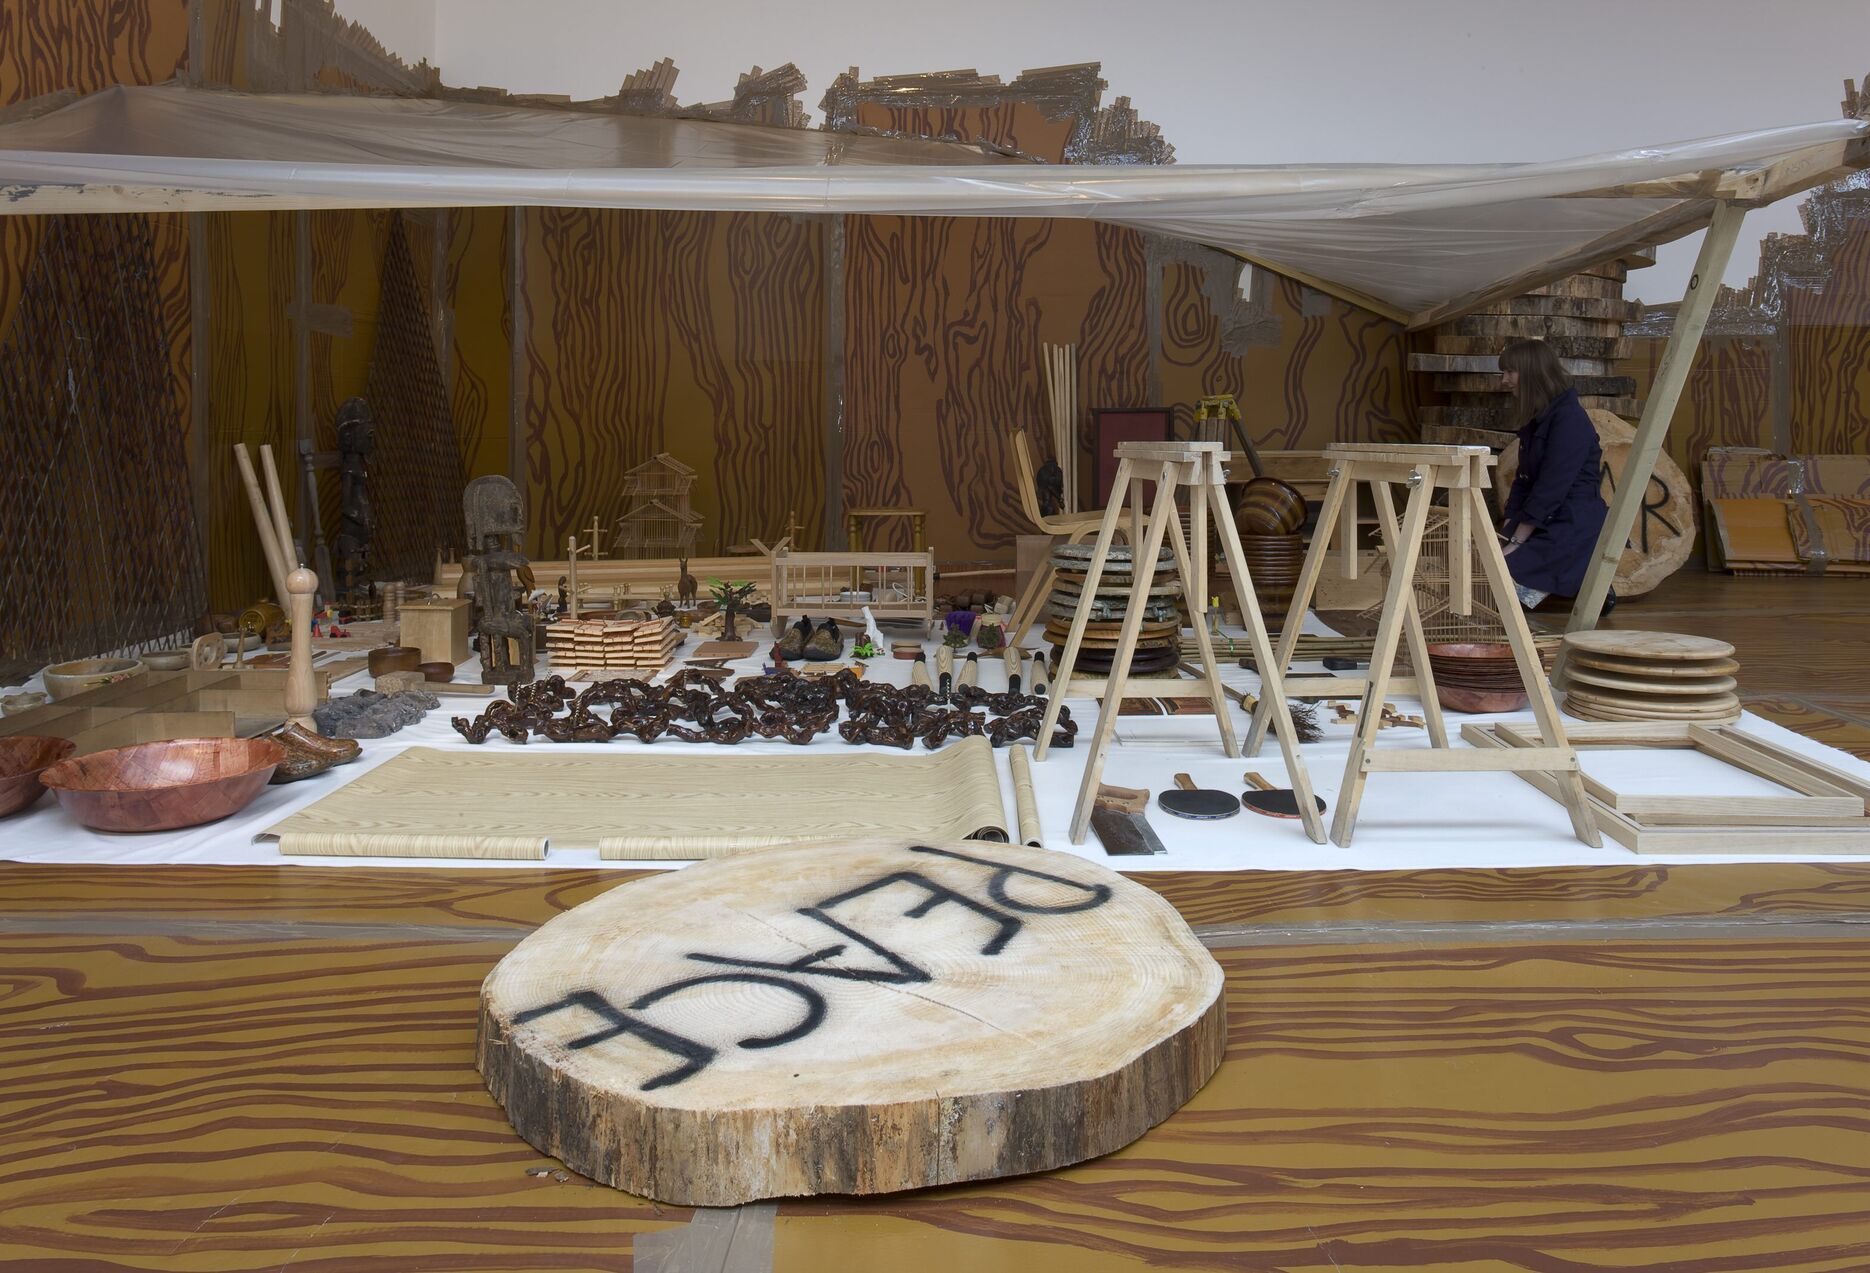 From Thomas Hirschhorn's exhibition. There is a collection of small wooden ornaments and baskets on a mat on the floor. There's also a tree stump with the word 'PEACE' spray painted on it.